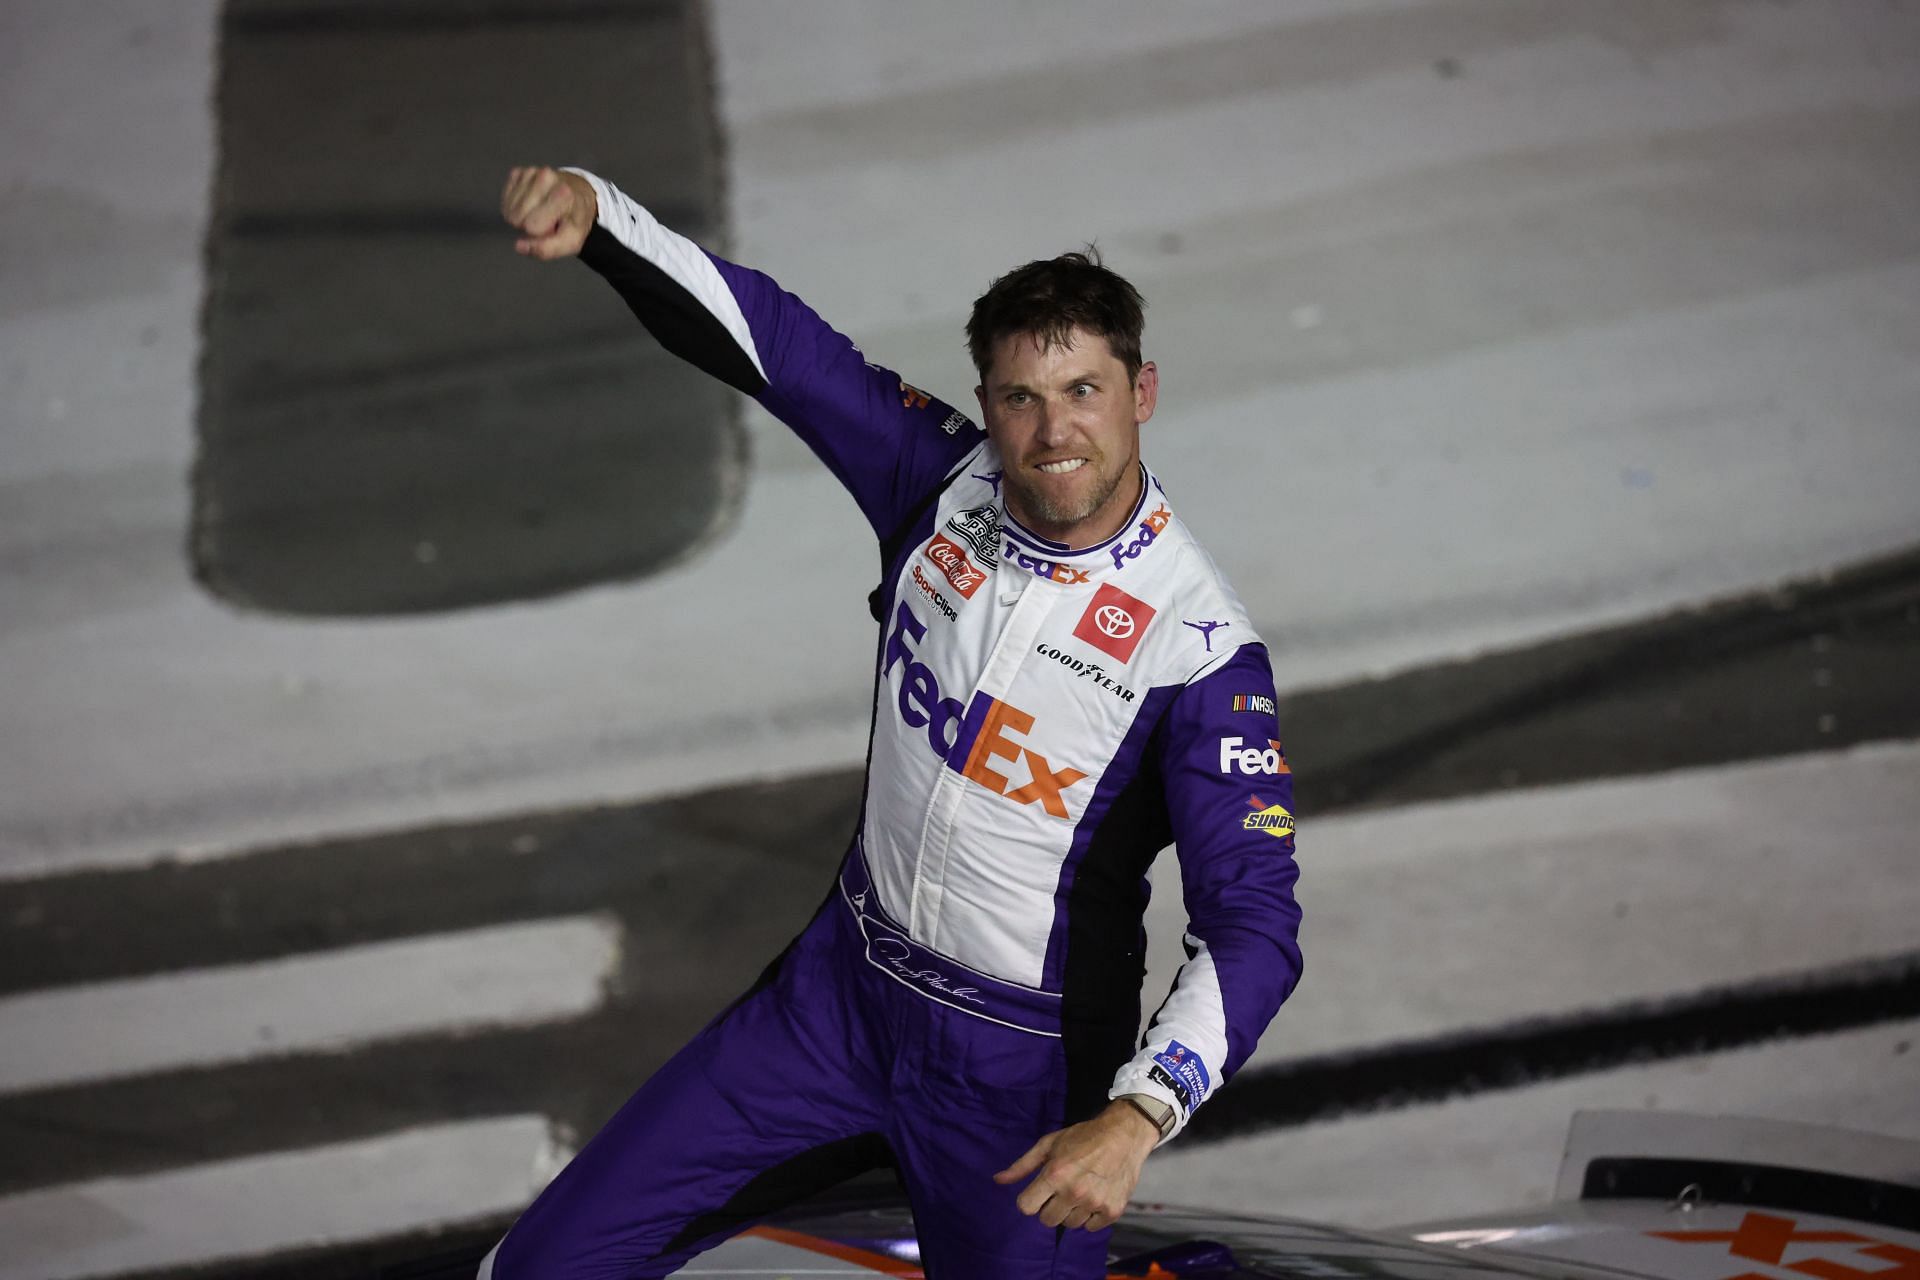 Denny Hamlin celebrates after winning the NASCAR Cup Series Coca-Cola 600 at Charlotte Motor Speedway.